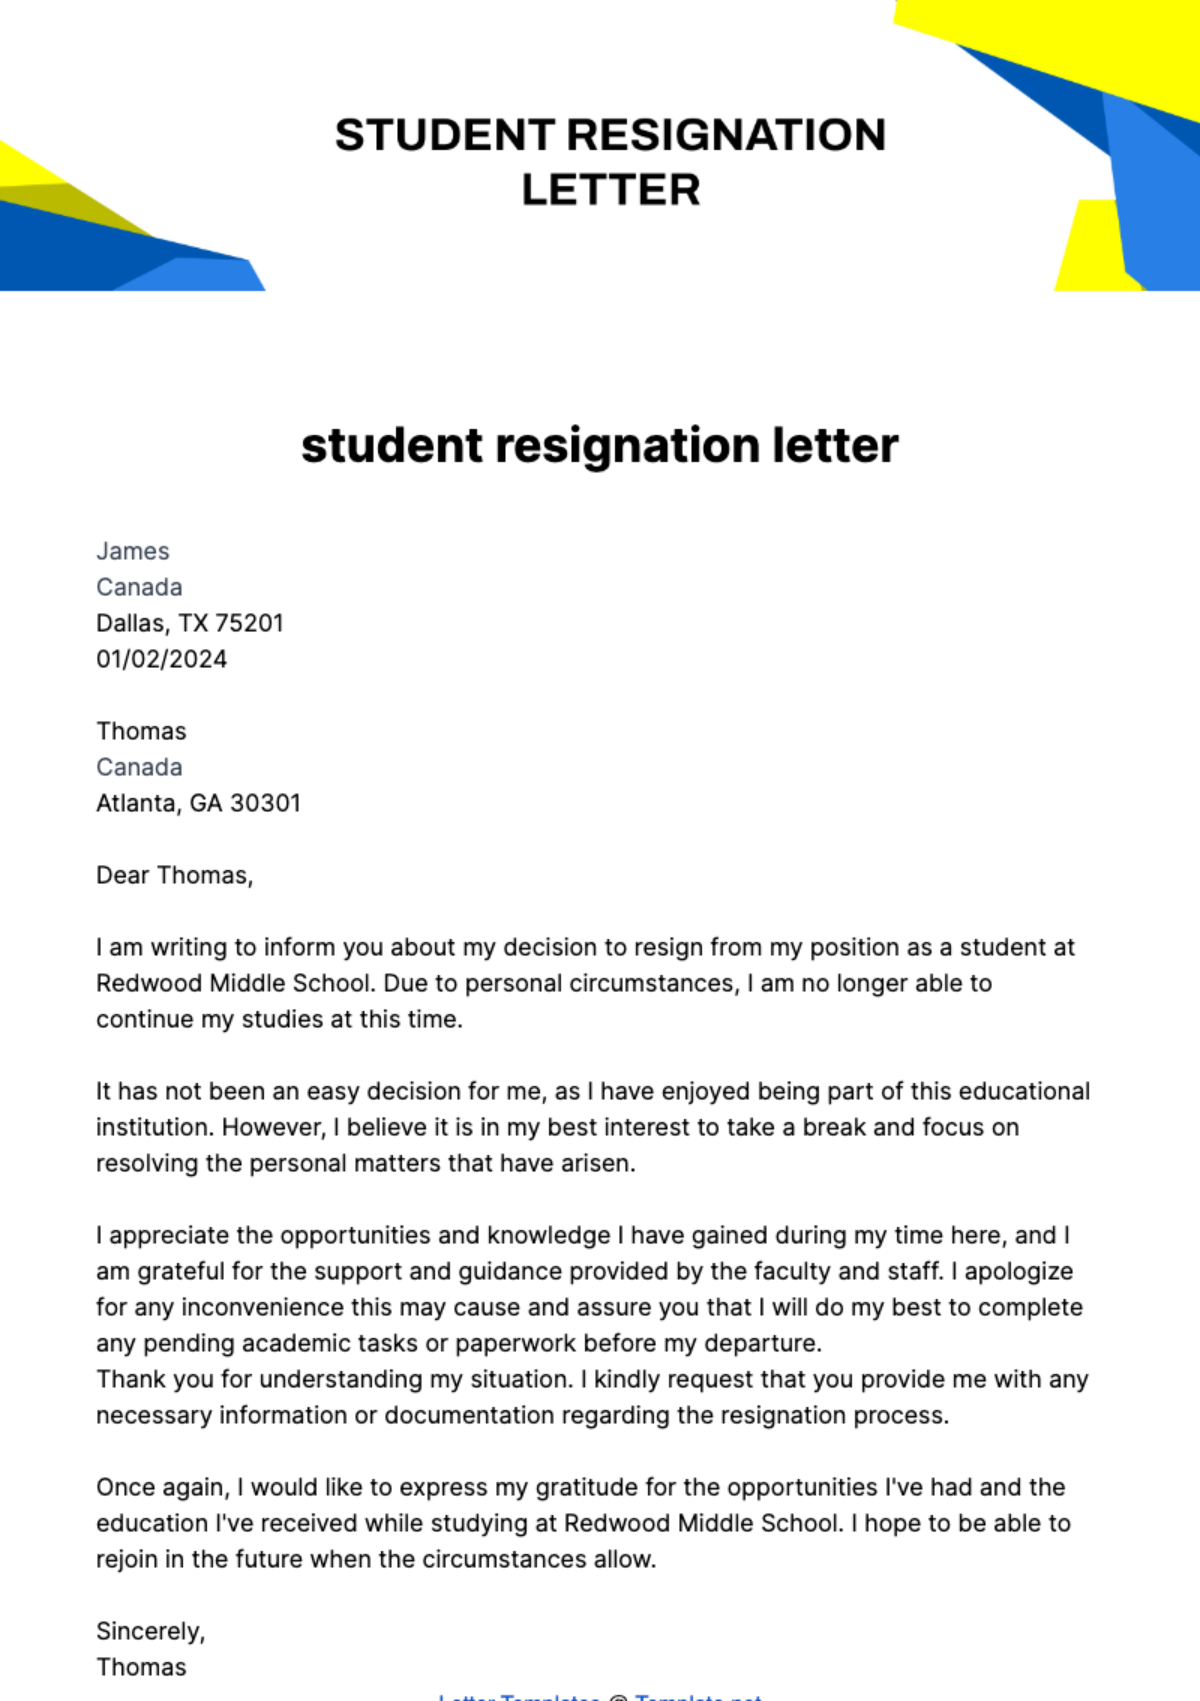 Free student resignation letter Template